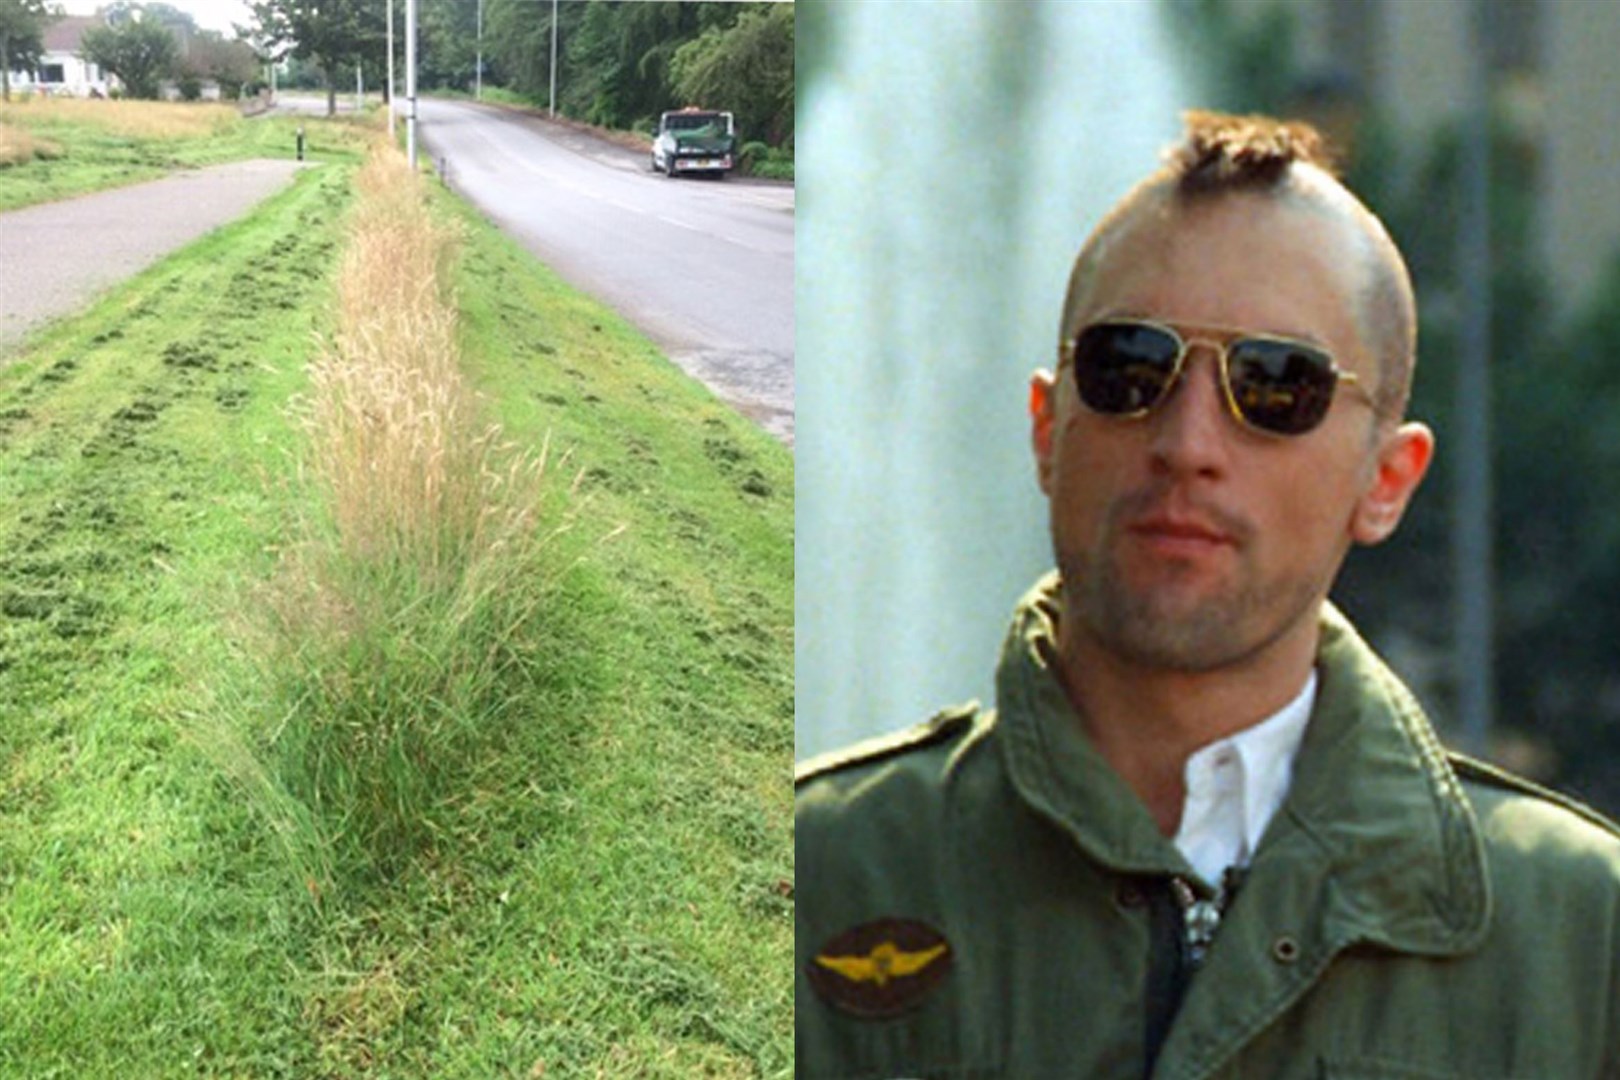 On the left, the grass verge on Elgin's Morriston Road. On the right, Robert De Niro in Taxi Driver.